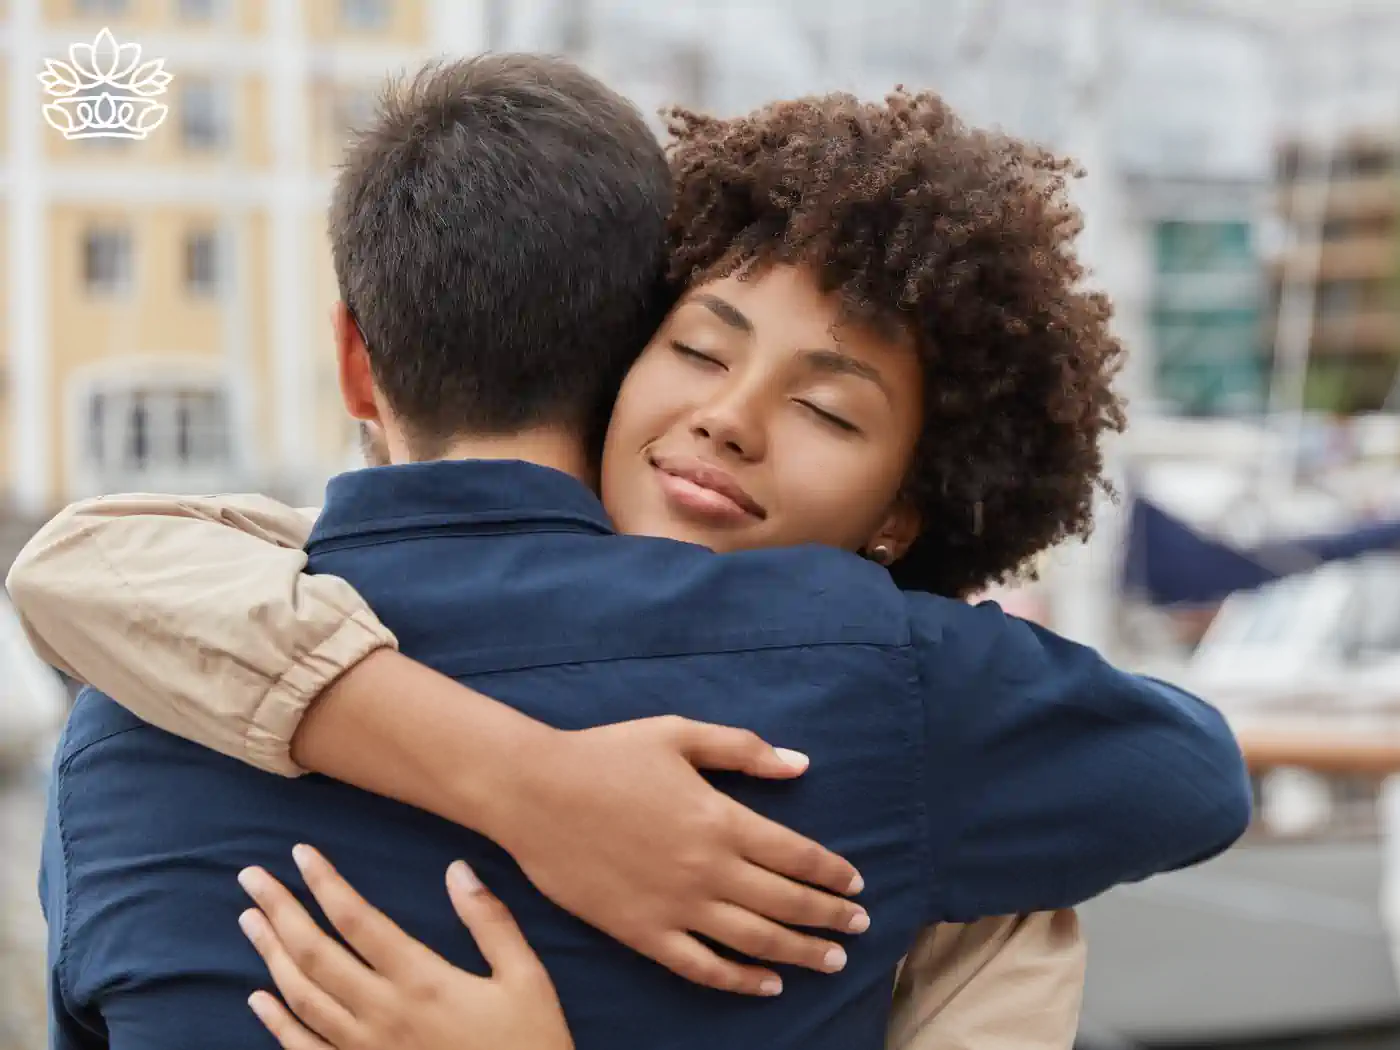 Warm embrace between a young woman with curly hair and a man, sharing a comforting moment in a serene marina setting. Coffin sprays from Fabulous Flowers and Gifts.